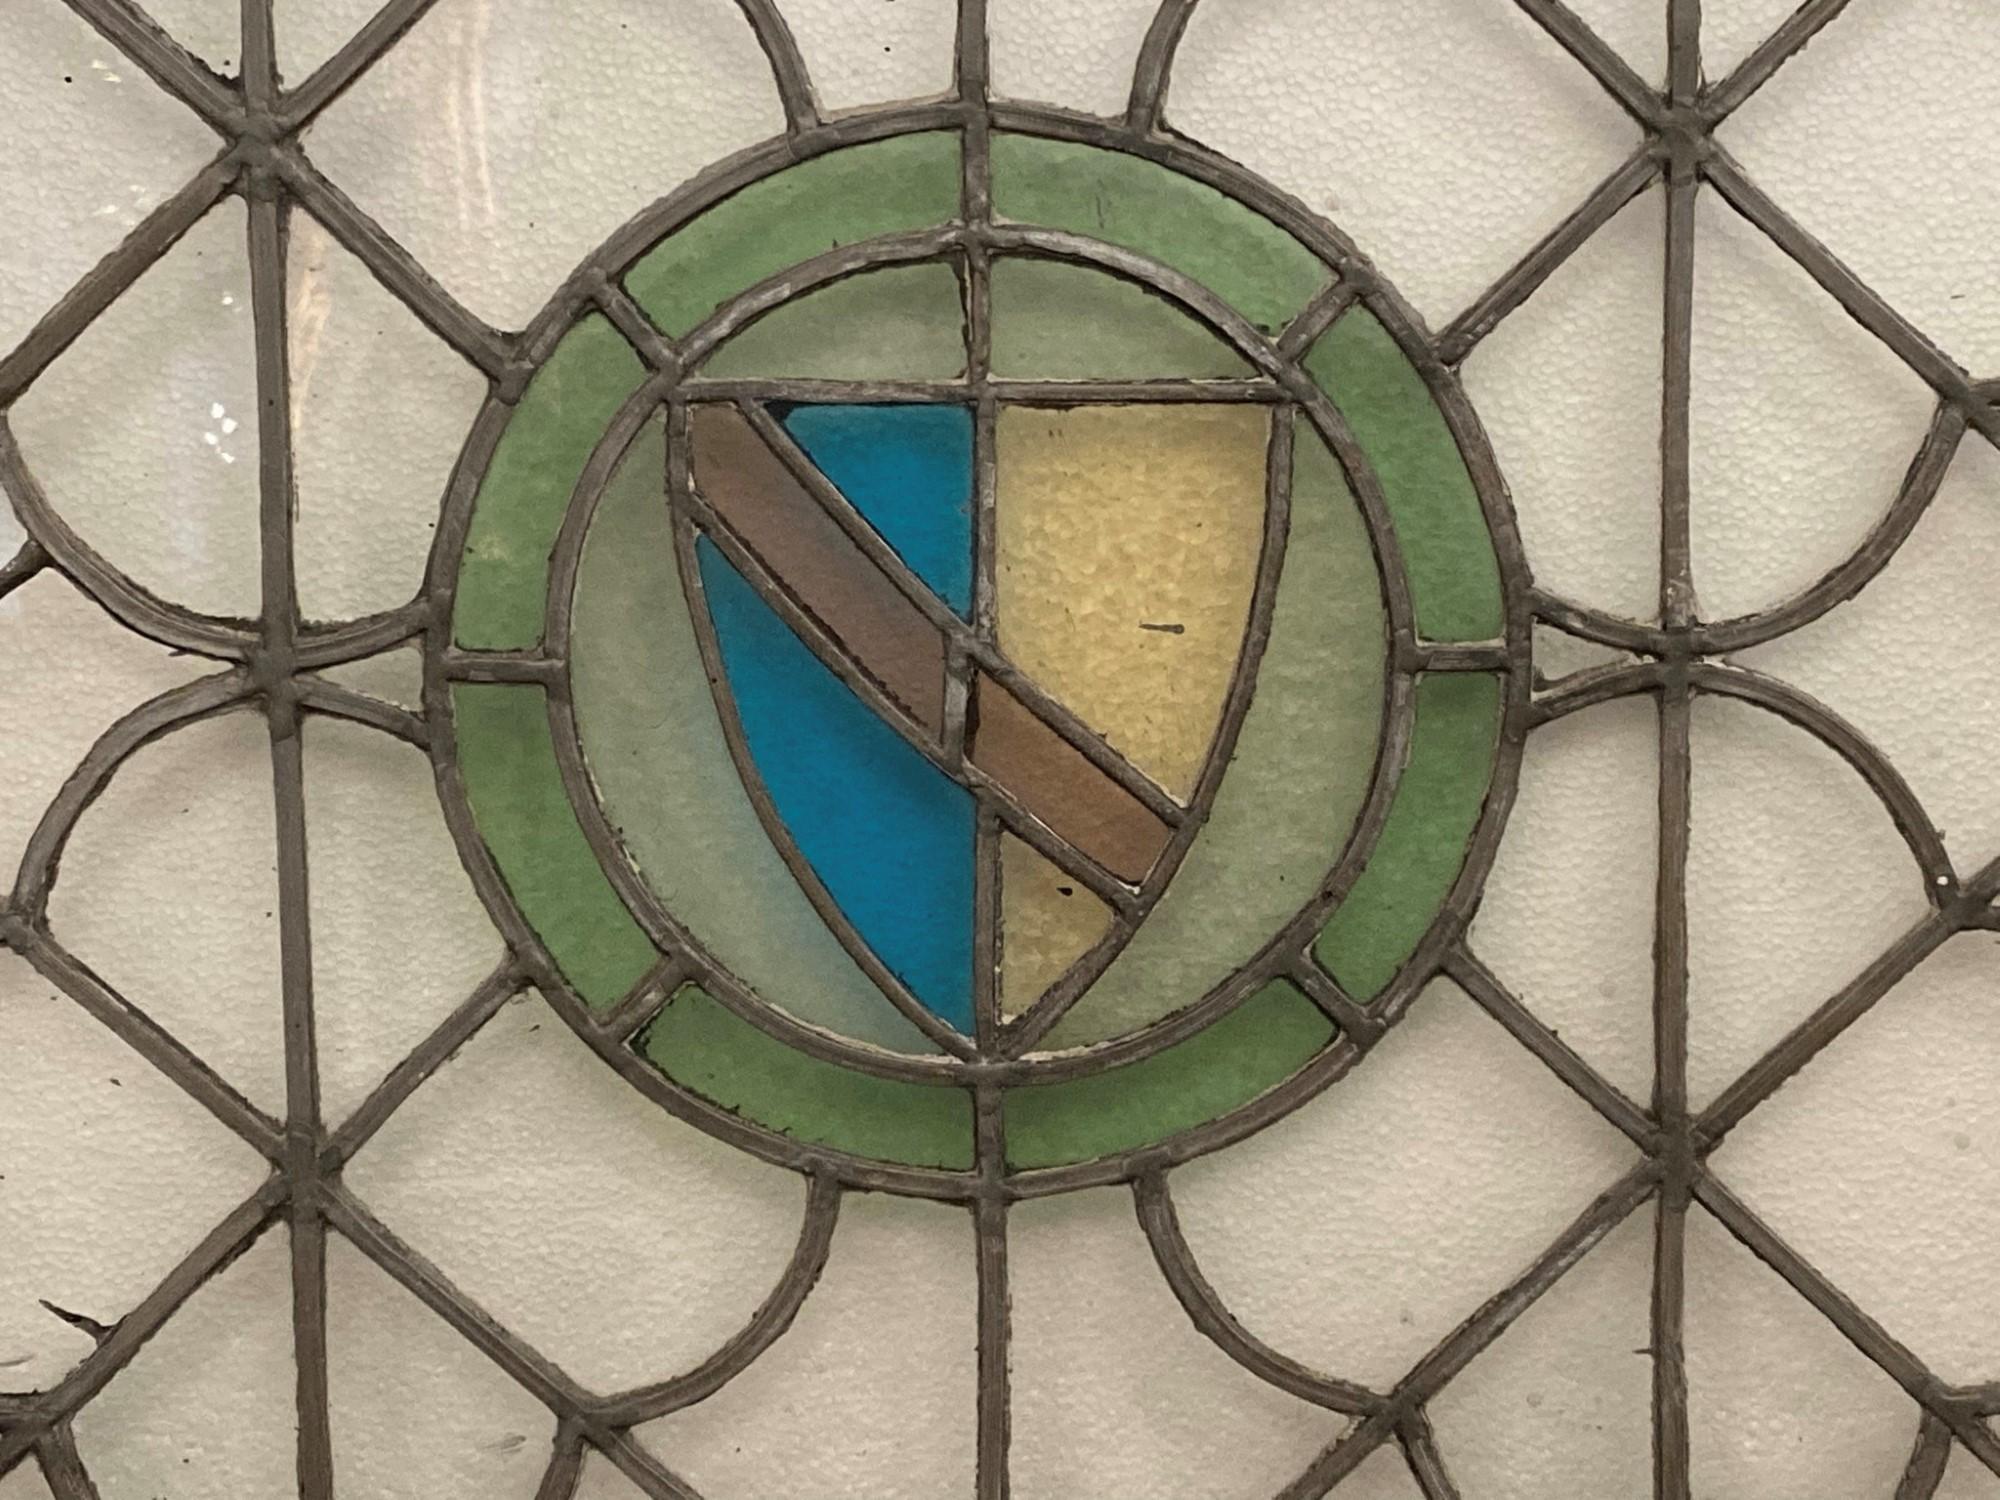 Originally a pivoted window, this wood framed leaded glass window can either have the present frame trimmed down or be reinstalled in anew frame. This features a stained glass shield motif in the center done in rich colors. Clear glass background in